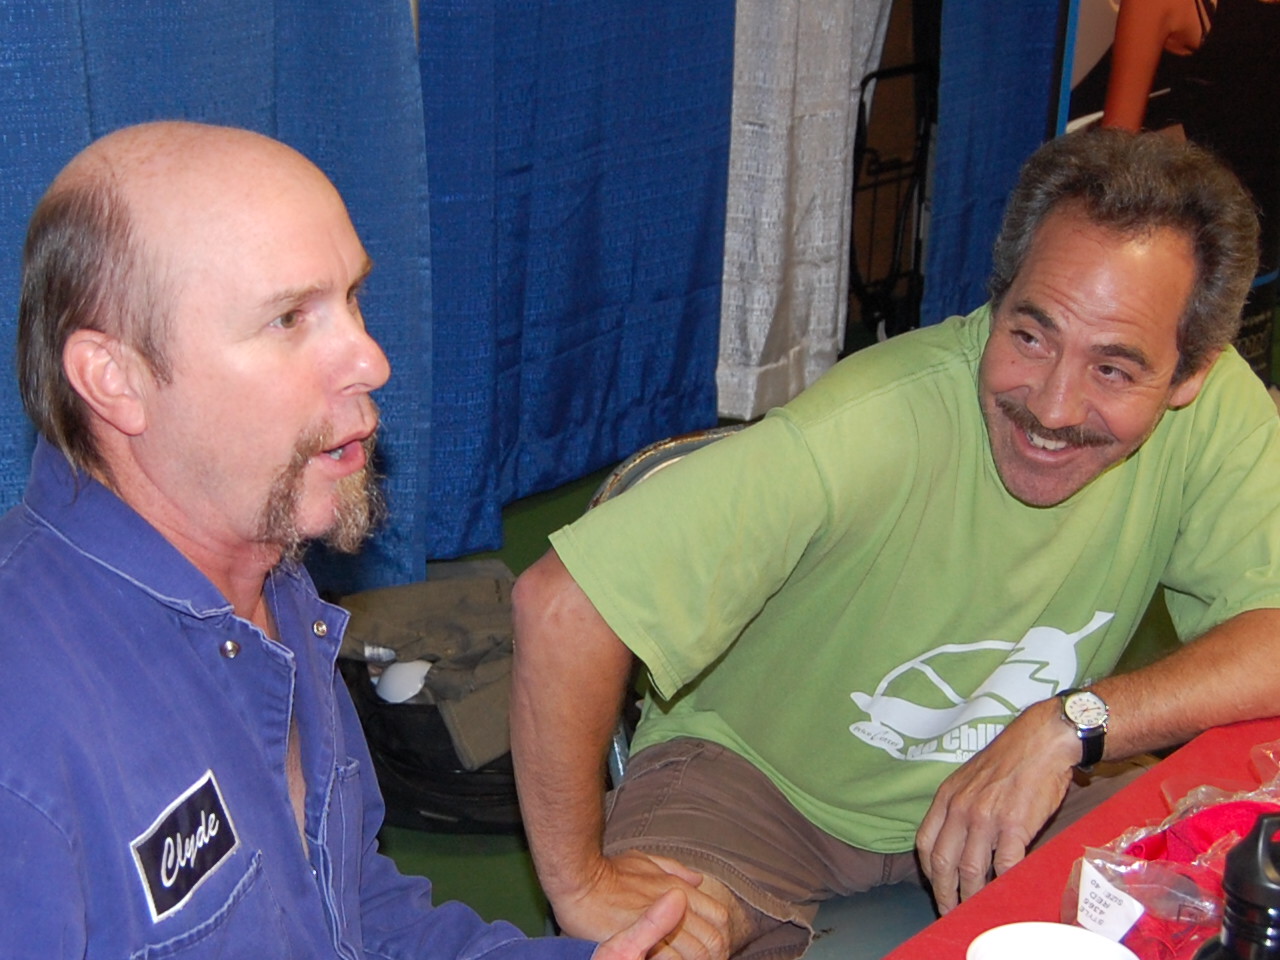 David Fultz with Larry Thomas aka The Soup Nazi at an event in Illinois